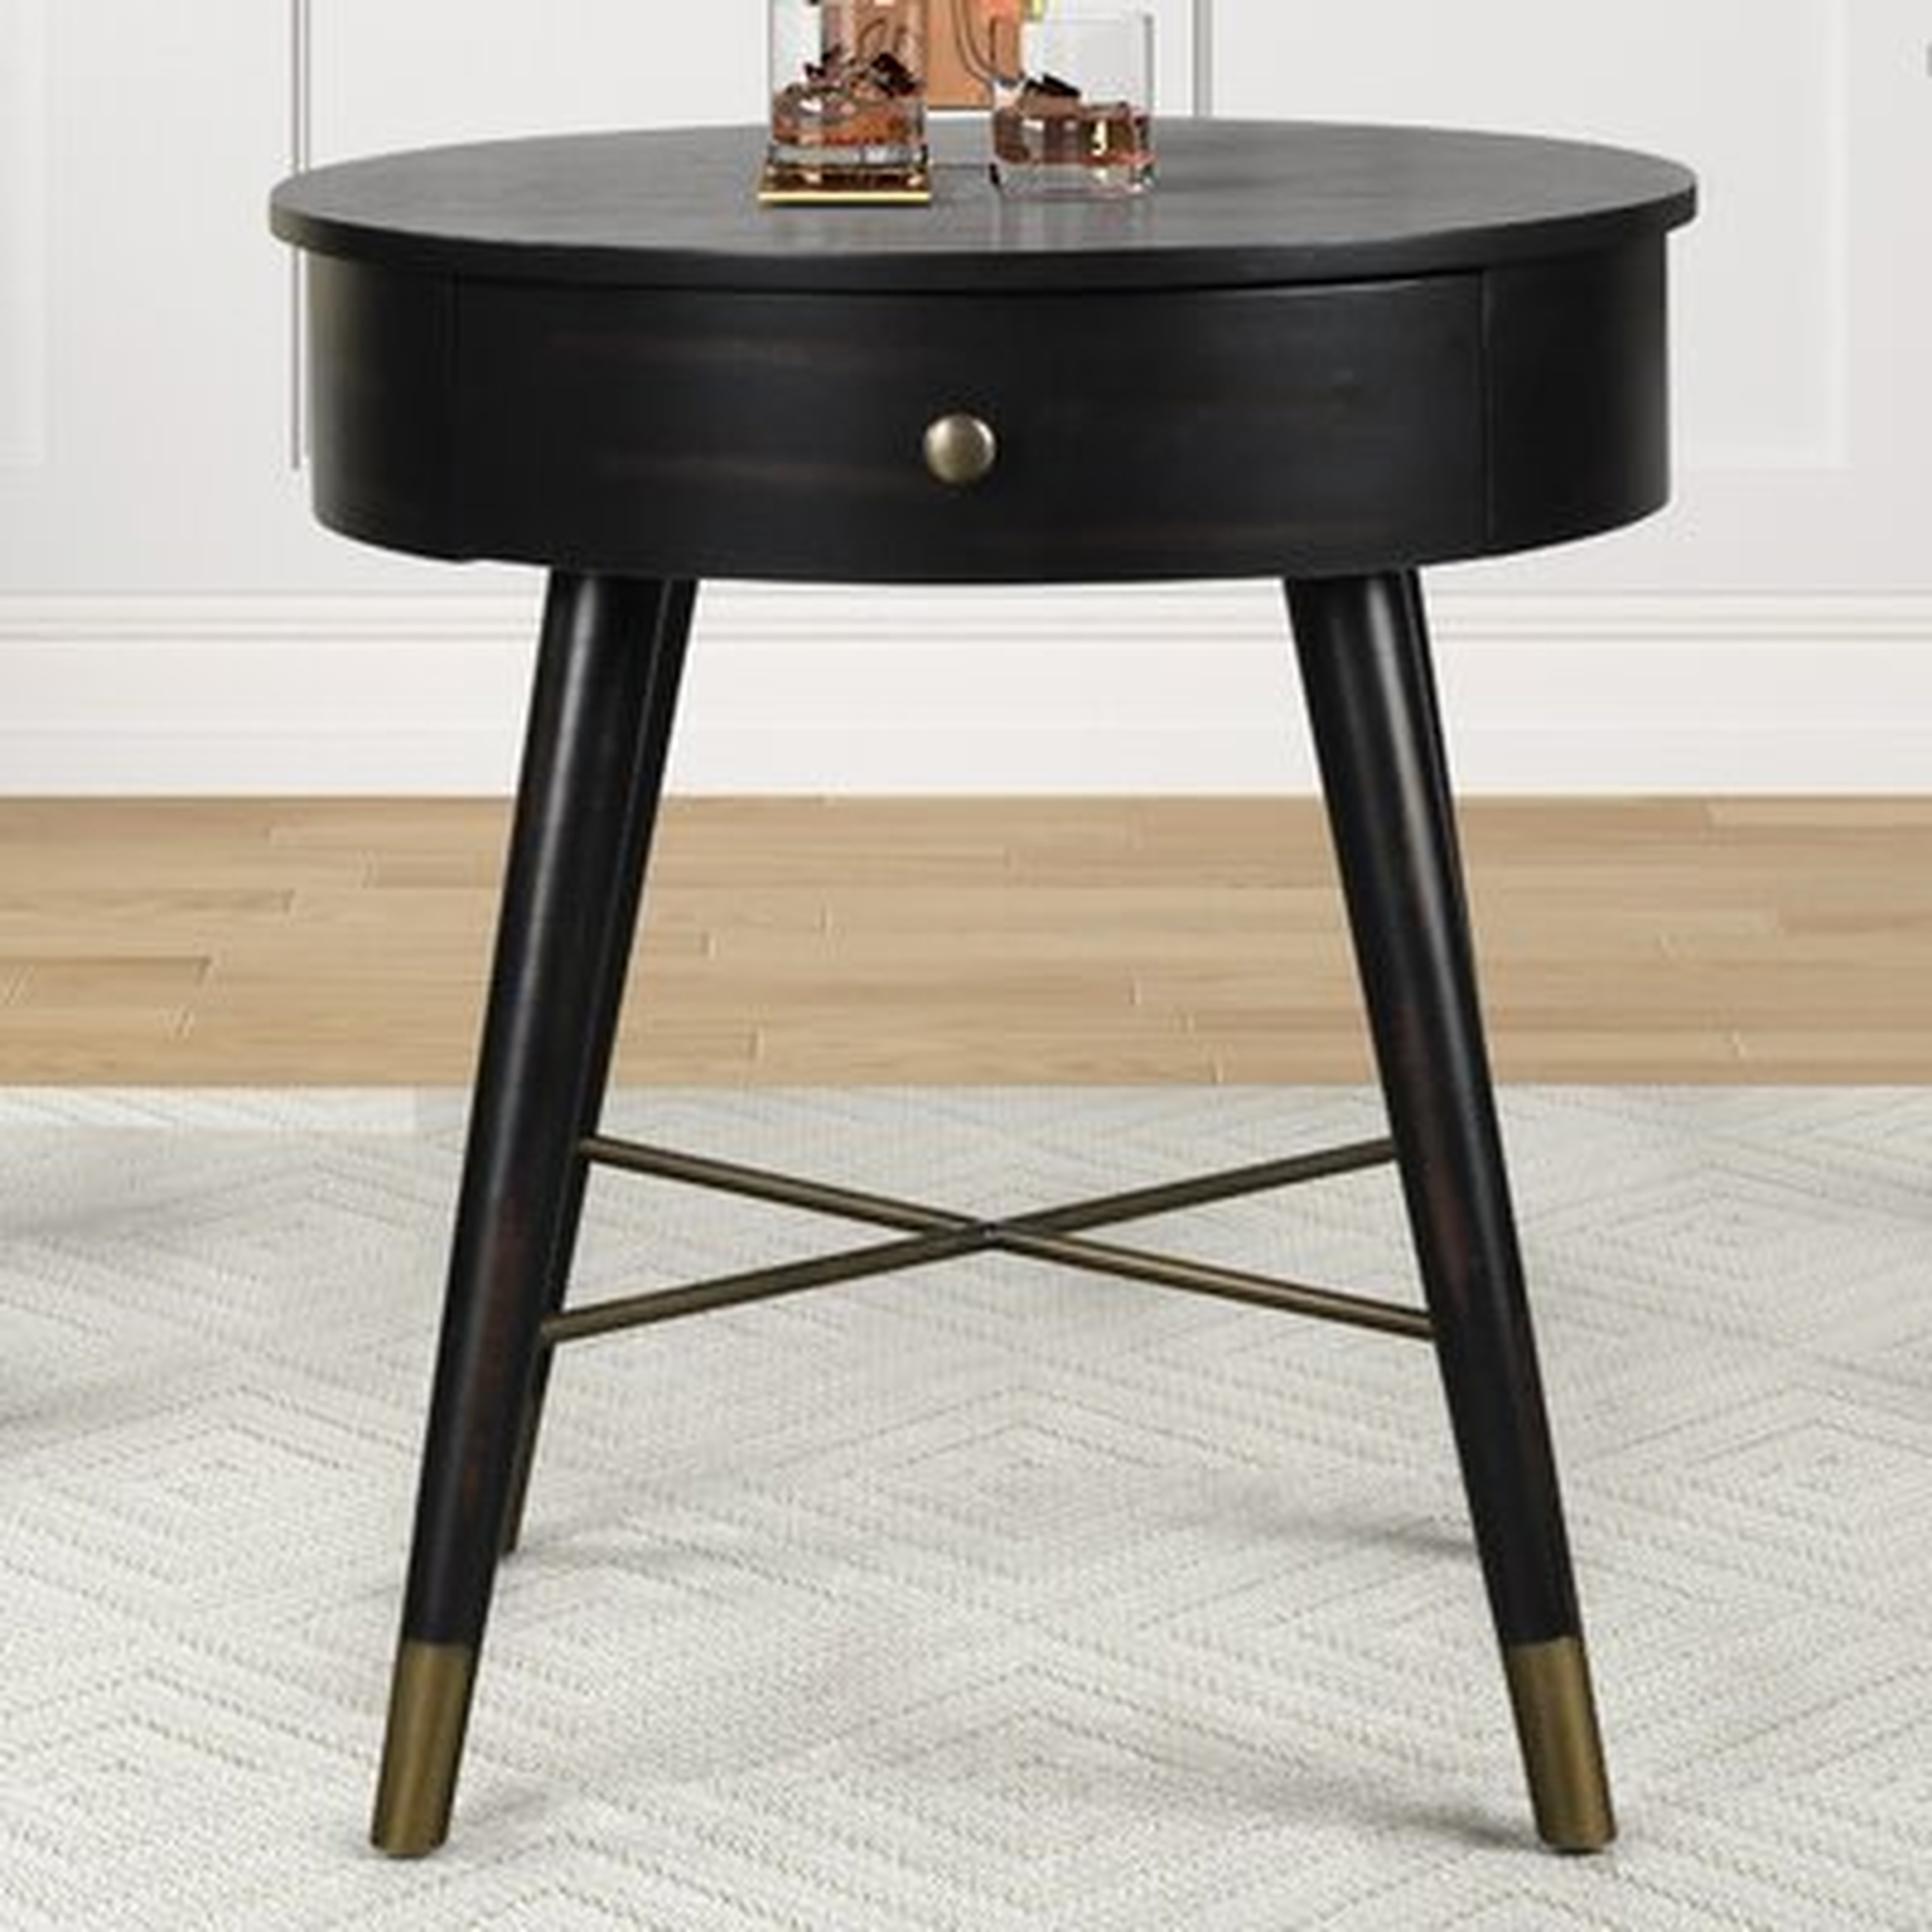 Manorville End Table with Storage - Wayfair